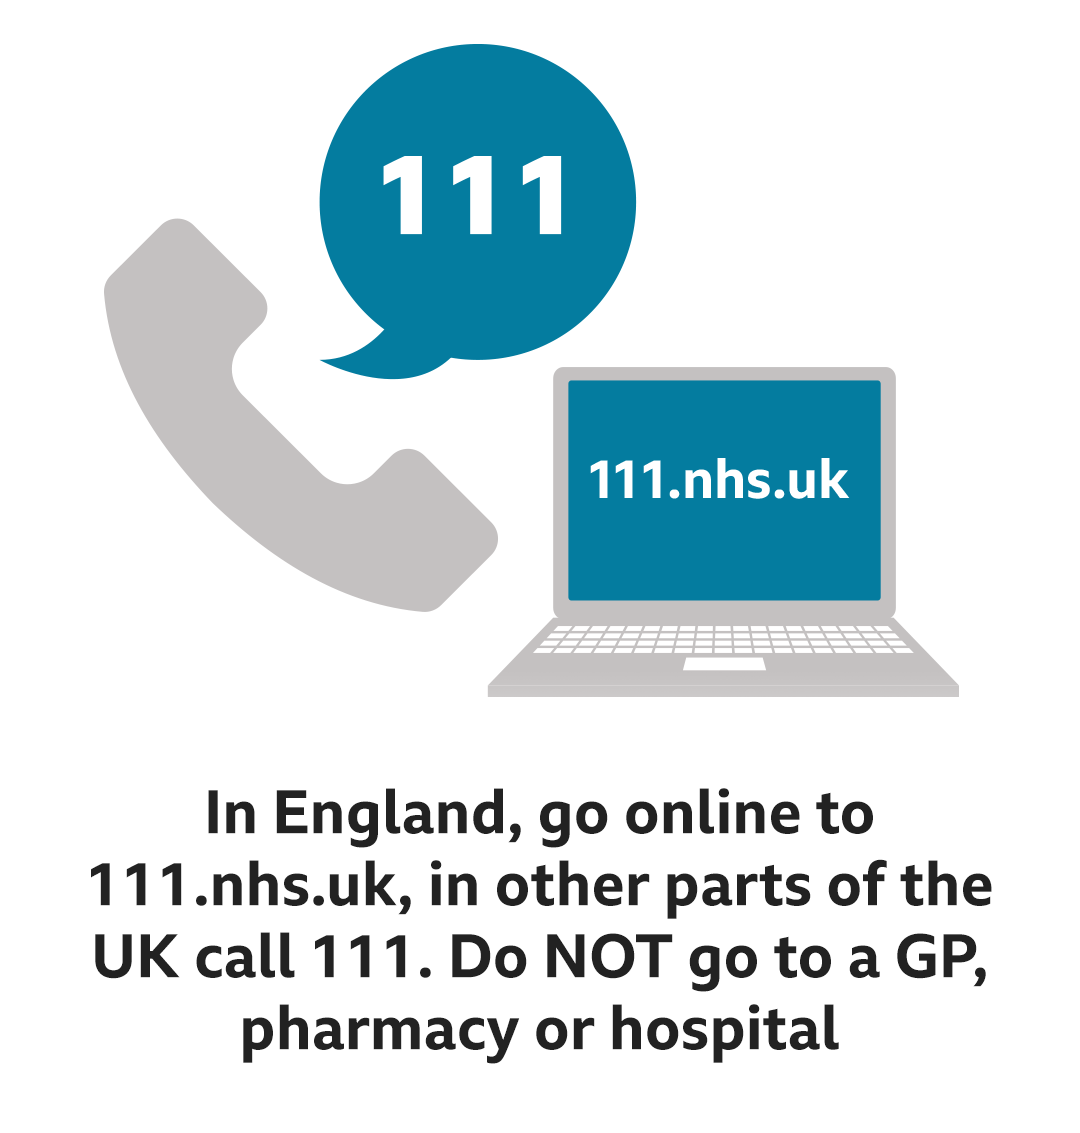 Text reads: In England, go online to 111.nhs.uk, in other parts of the UK call 111. Do NOT go to a GP, pharmacy or hospital